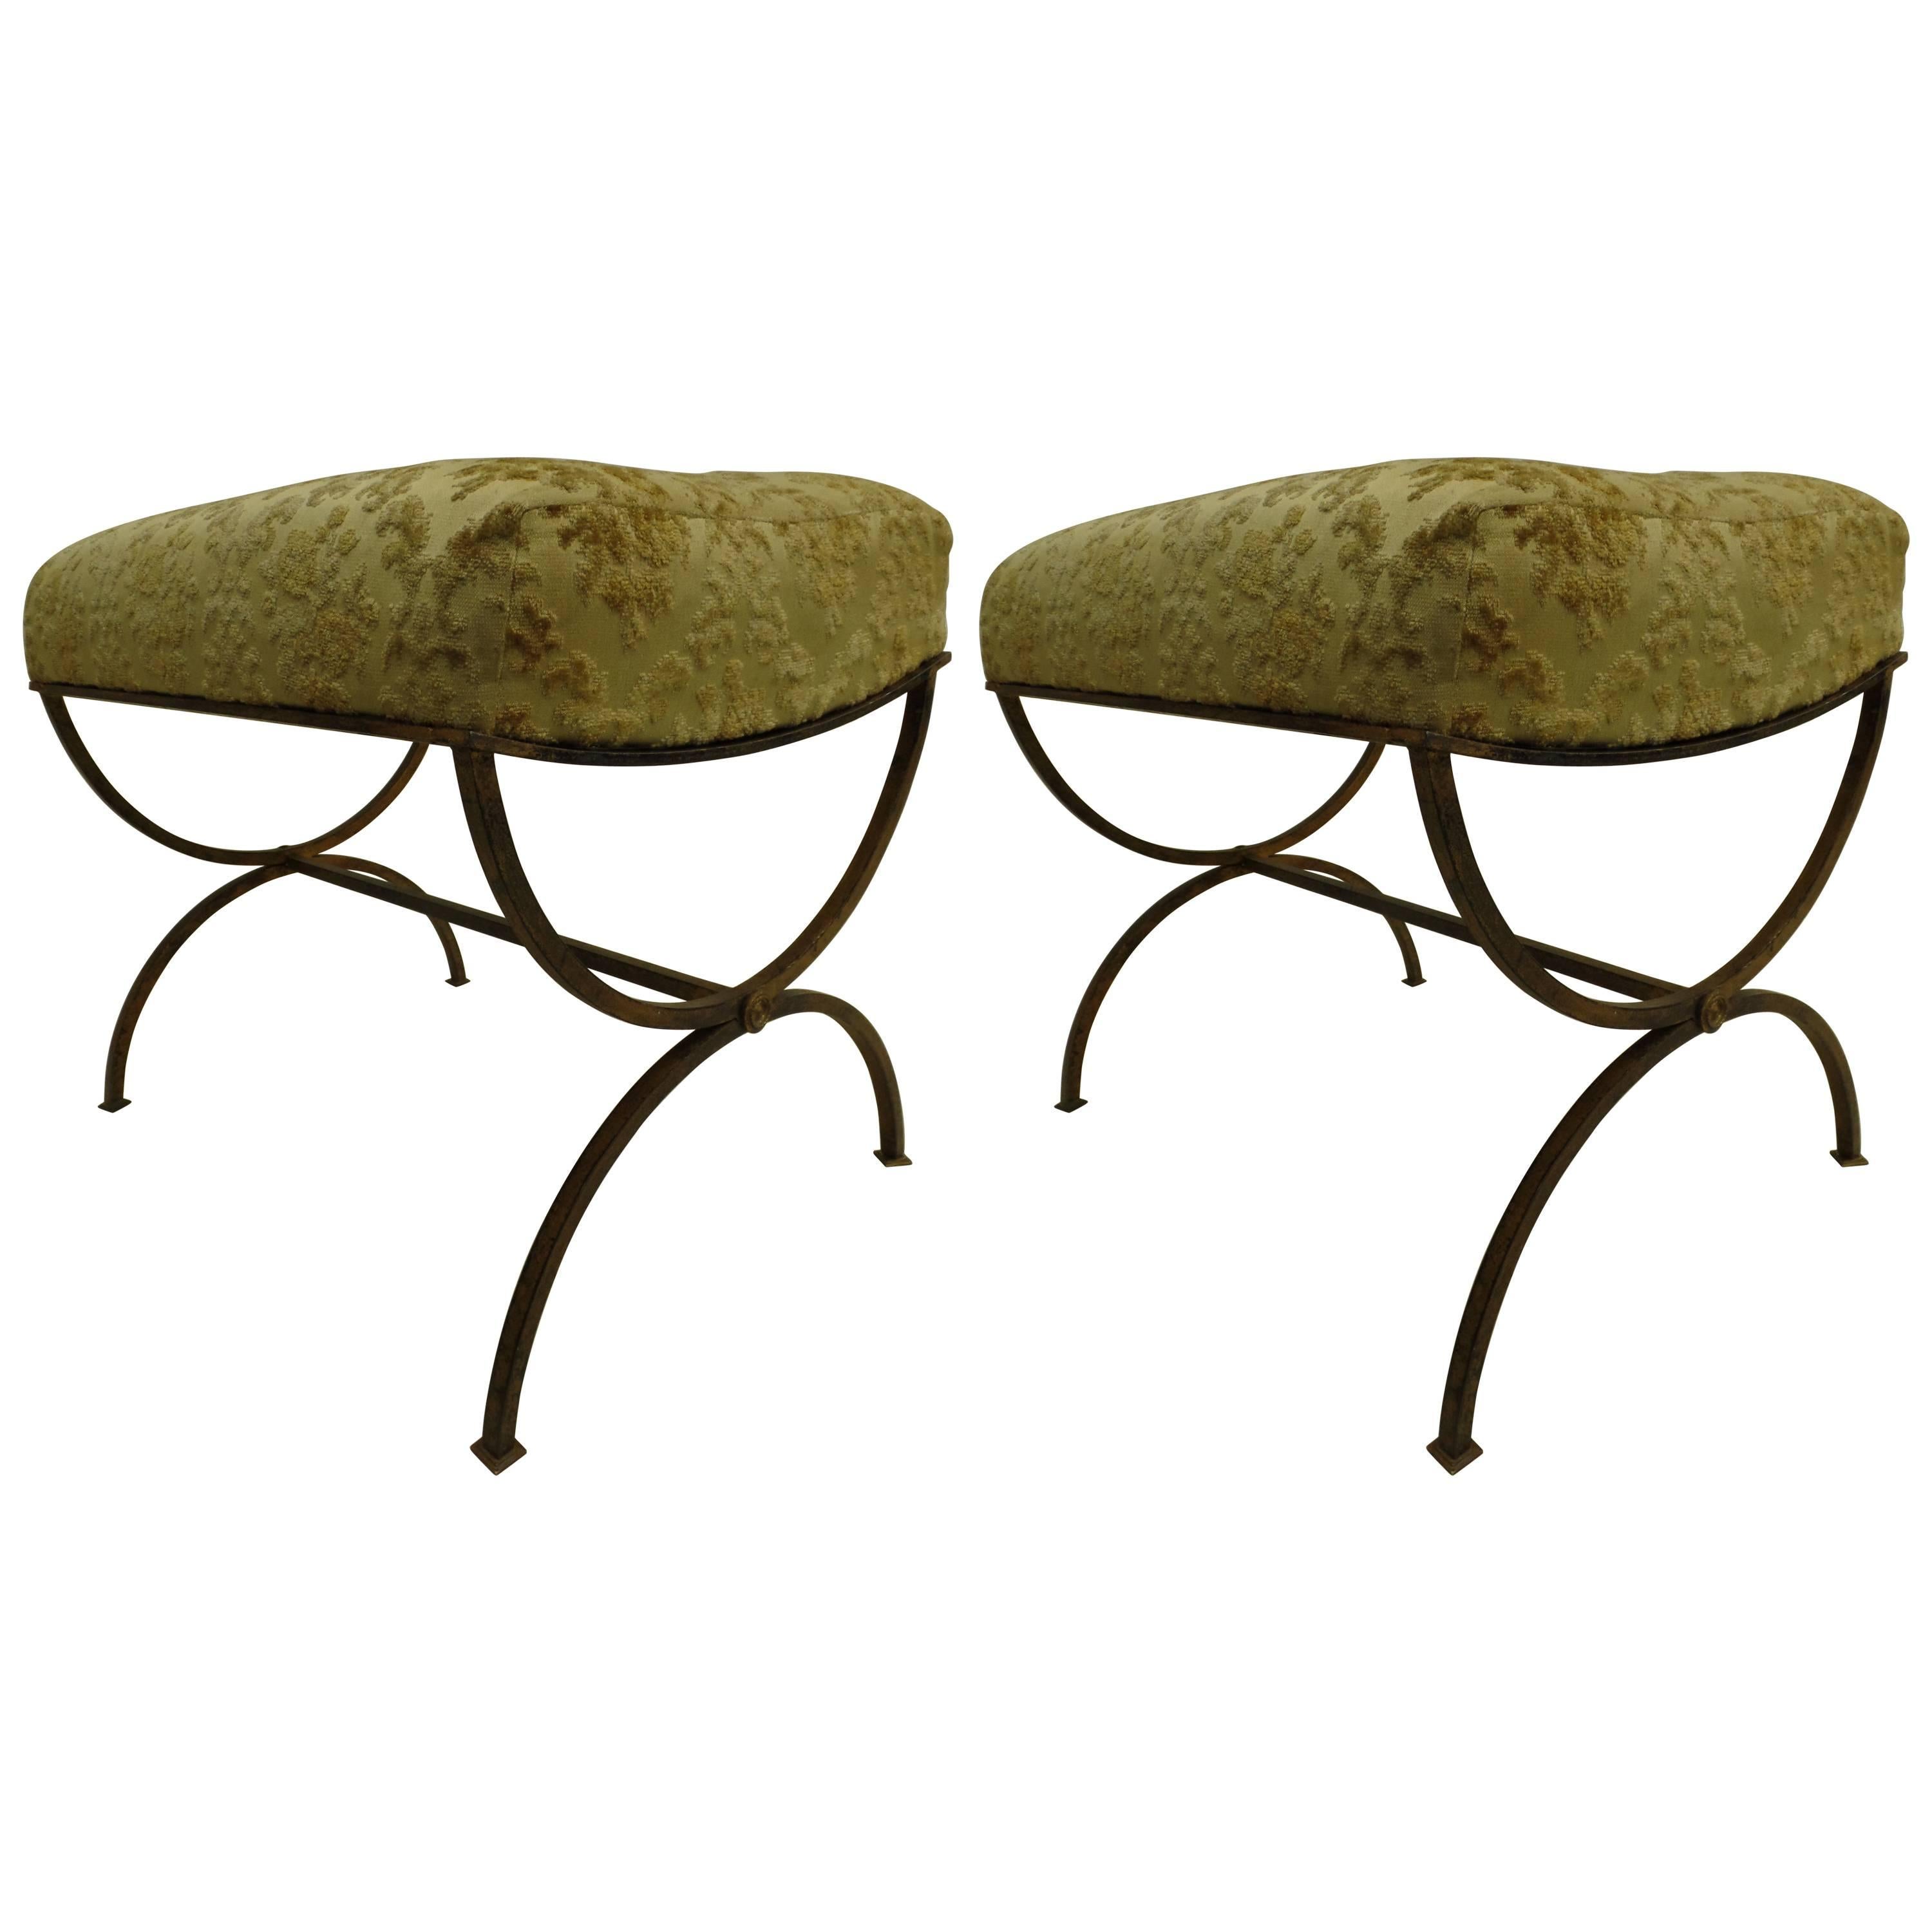 Pair of French, Mid-Century Modern X-Frame Gilt Iron Benches by Maison Ramsay